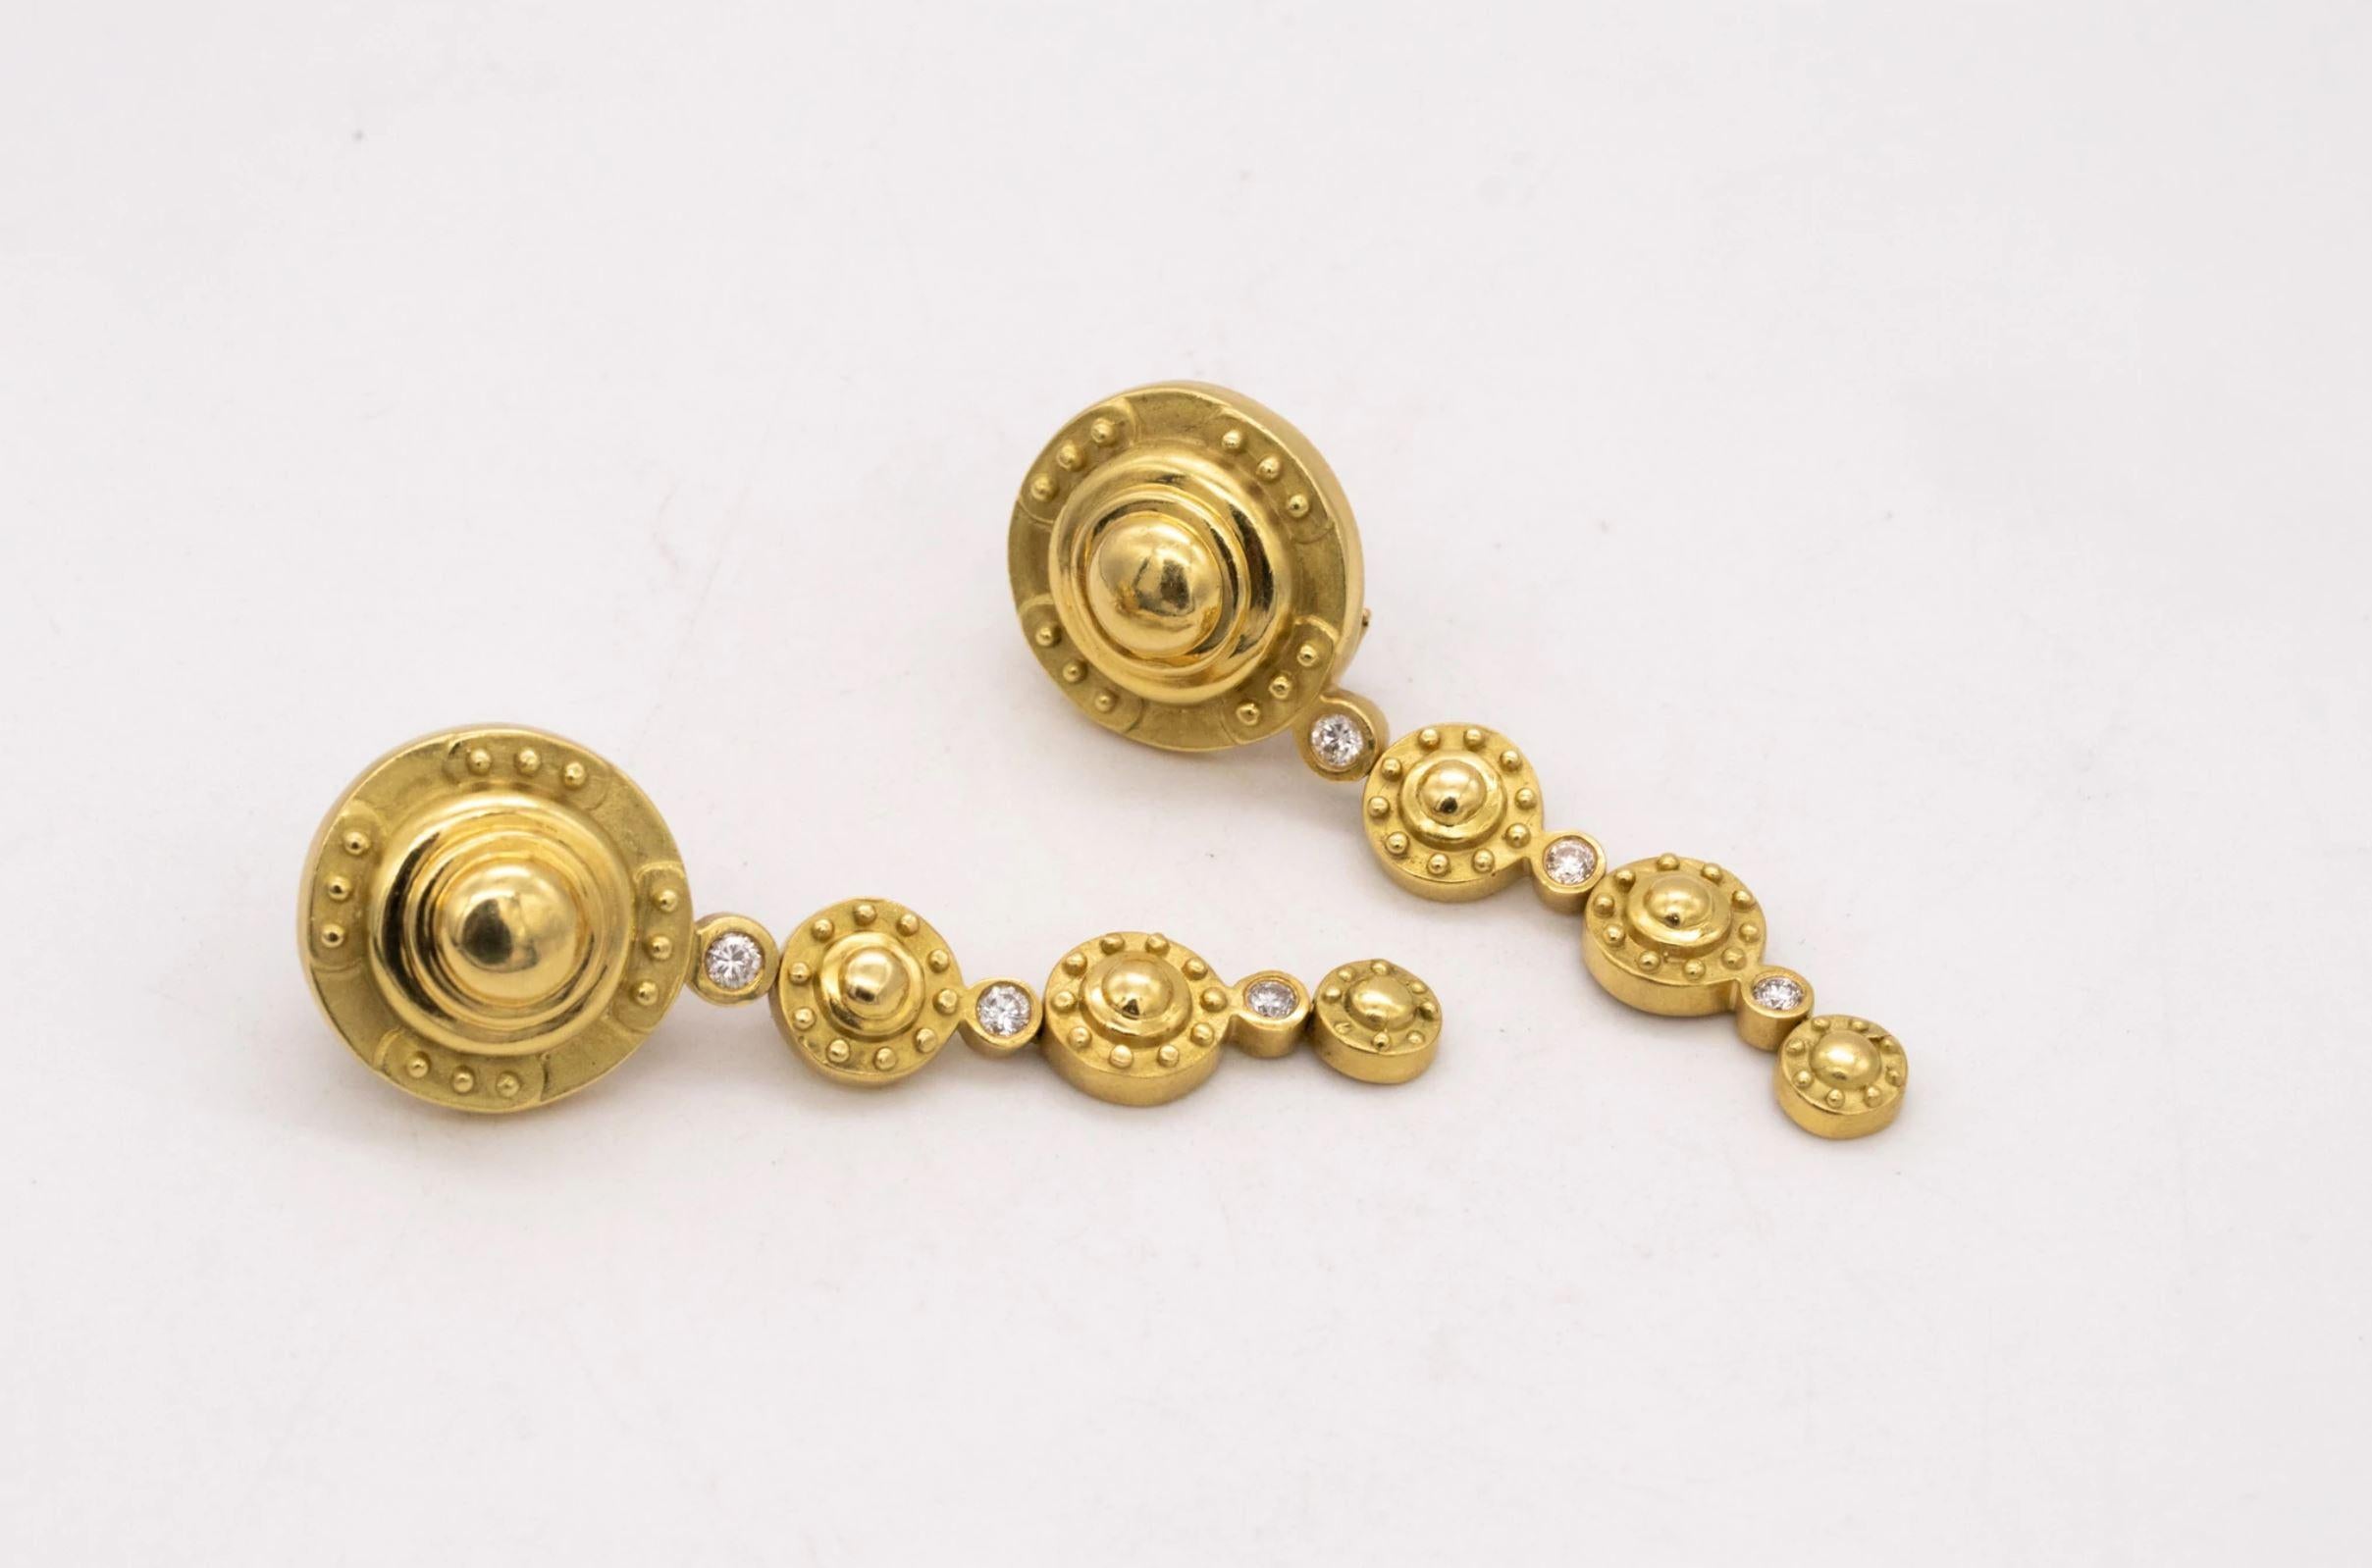 Elegant drop pair of earrings designed by Seidengang.

A vintage early pair, made by the jewelry designer's SeidenGang. These drop earrings are part of the Etruscan revival collection, carefully crafted in solid rich yellow gold of 18 karats, with